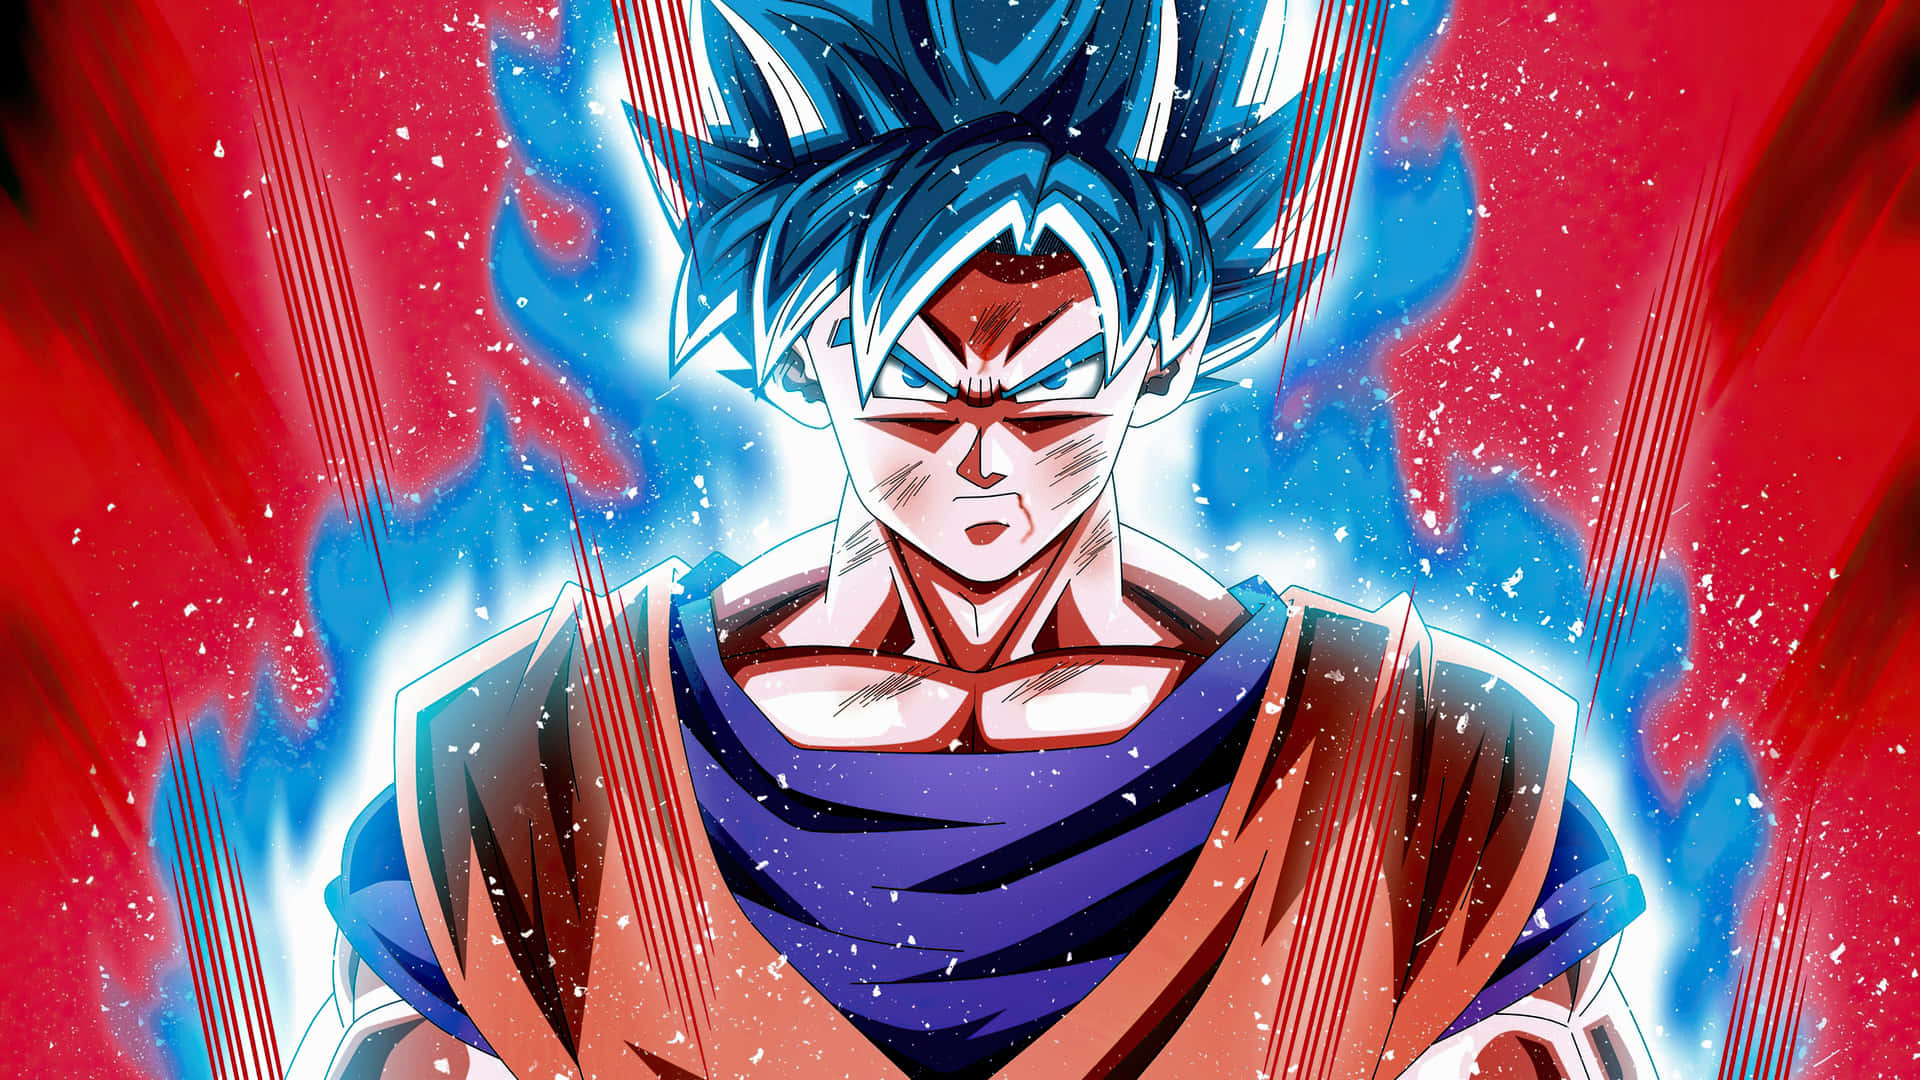 Download Cool Dragon Ball Z Blue And Red Wallpaper